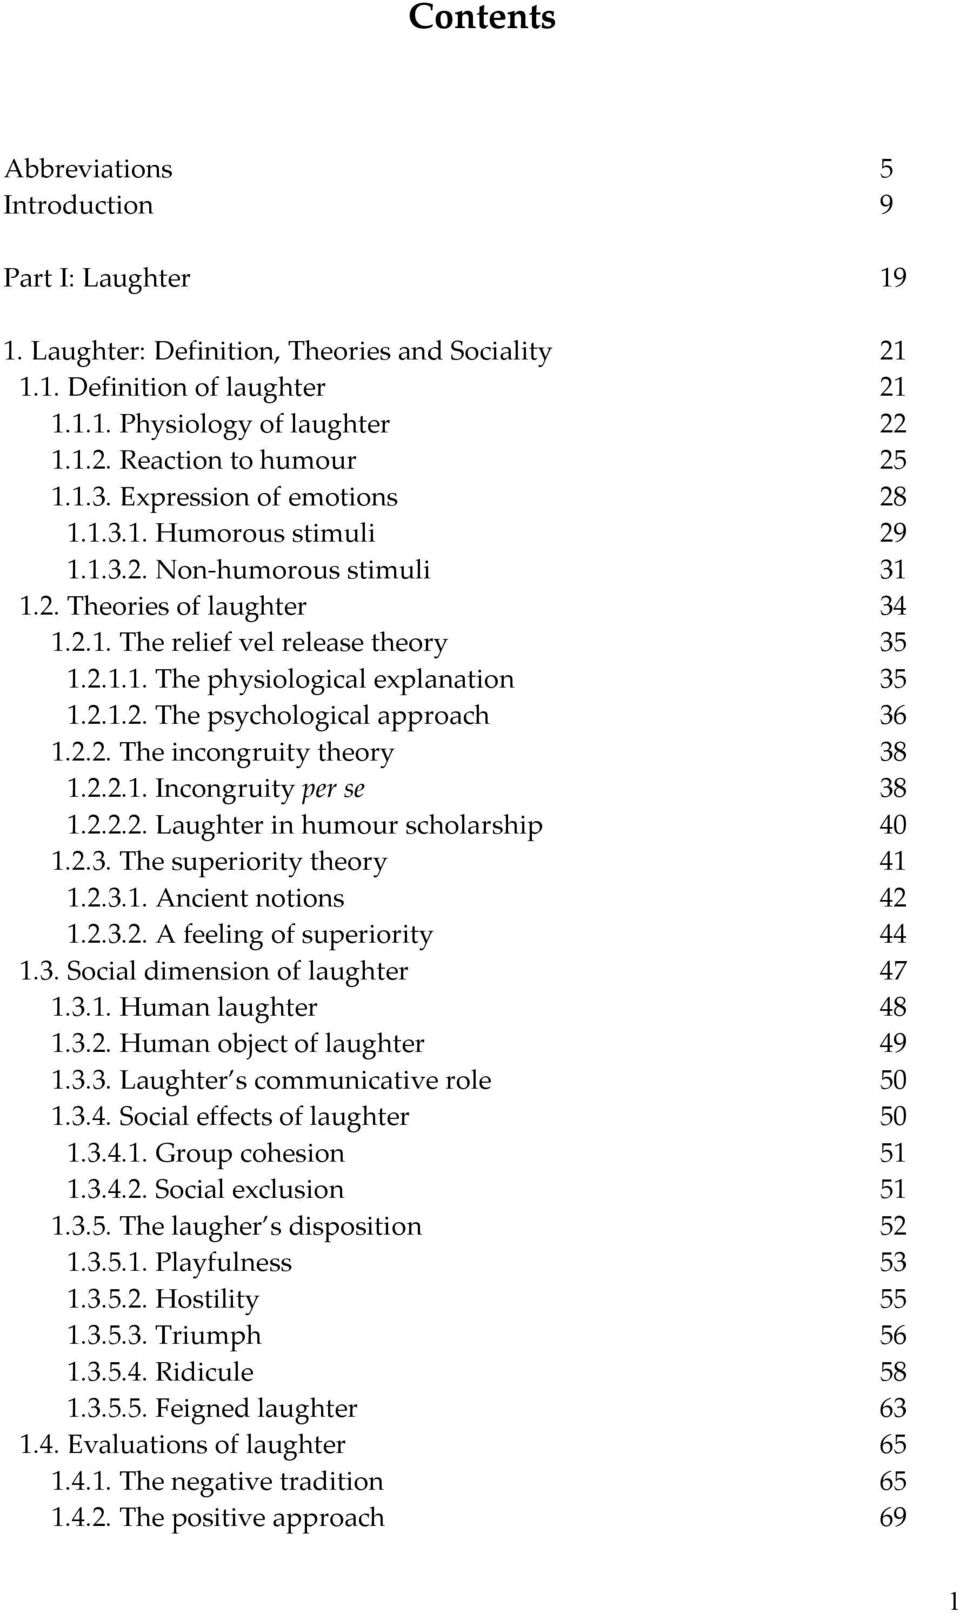 2.1.2. The psychological approach 36 1.2.2. The incongruity theory 38 1.2.2.1. Incongruity per se 38 1.2.2.2. Laughter in humour scholarship 40 1.2.3. The superiority theory 41 1.2.3.1. Ancient notions 42 1.